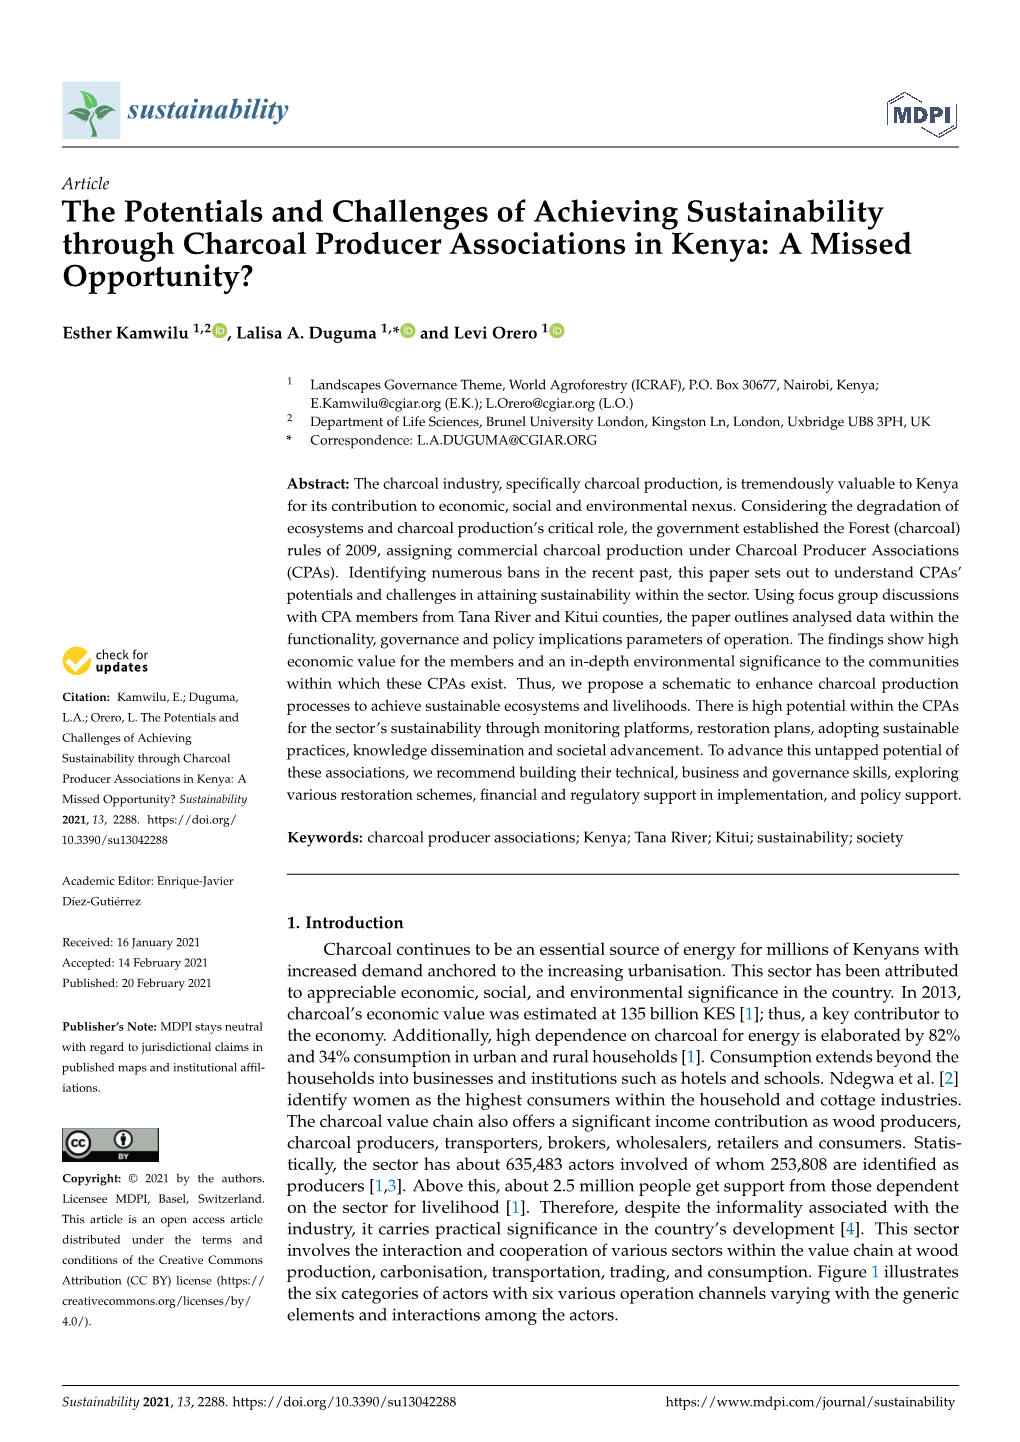 The Potentials and Challenges of Achieving Sustainability Through Charcoal Producer Associations in Kenya: a Missed Opportunity?